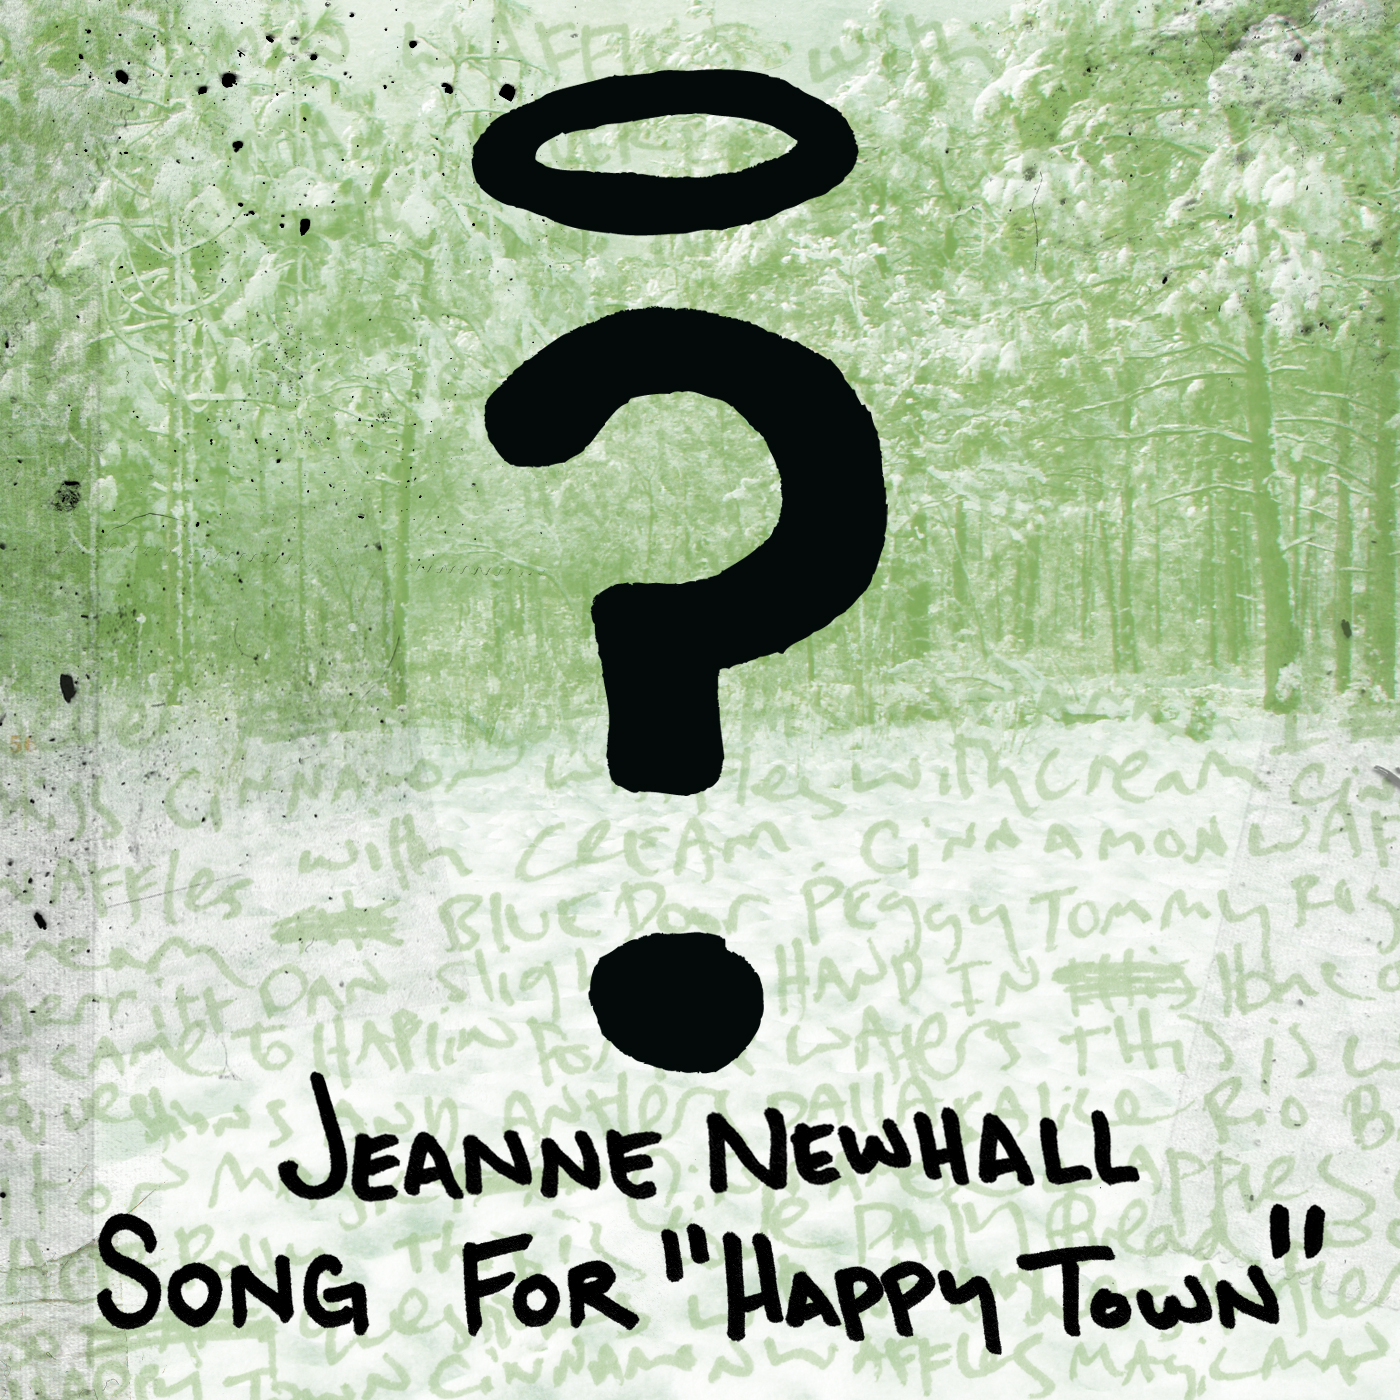 Song for Happy Town